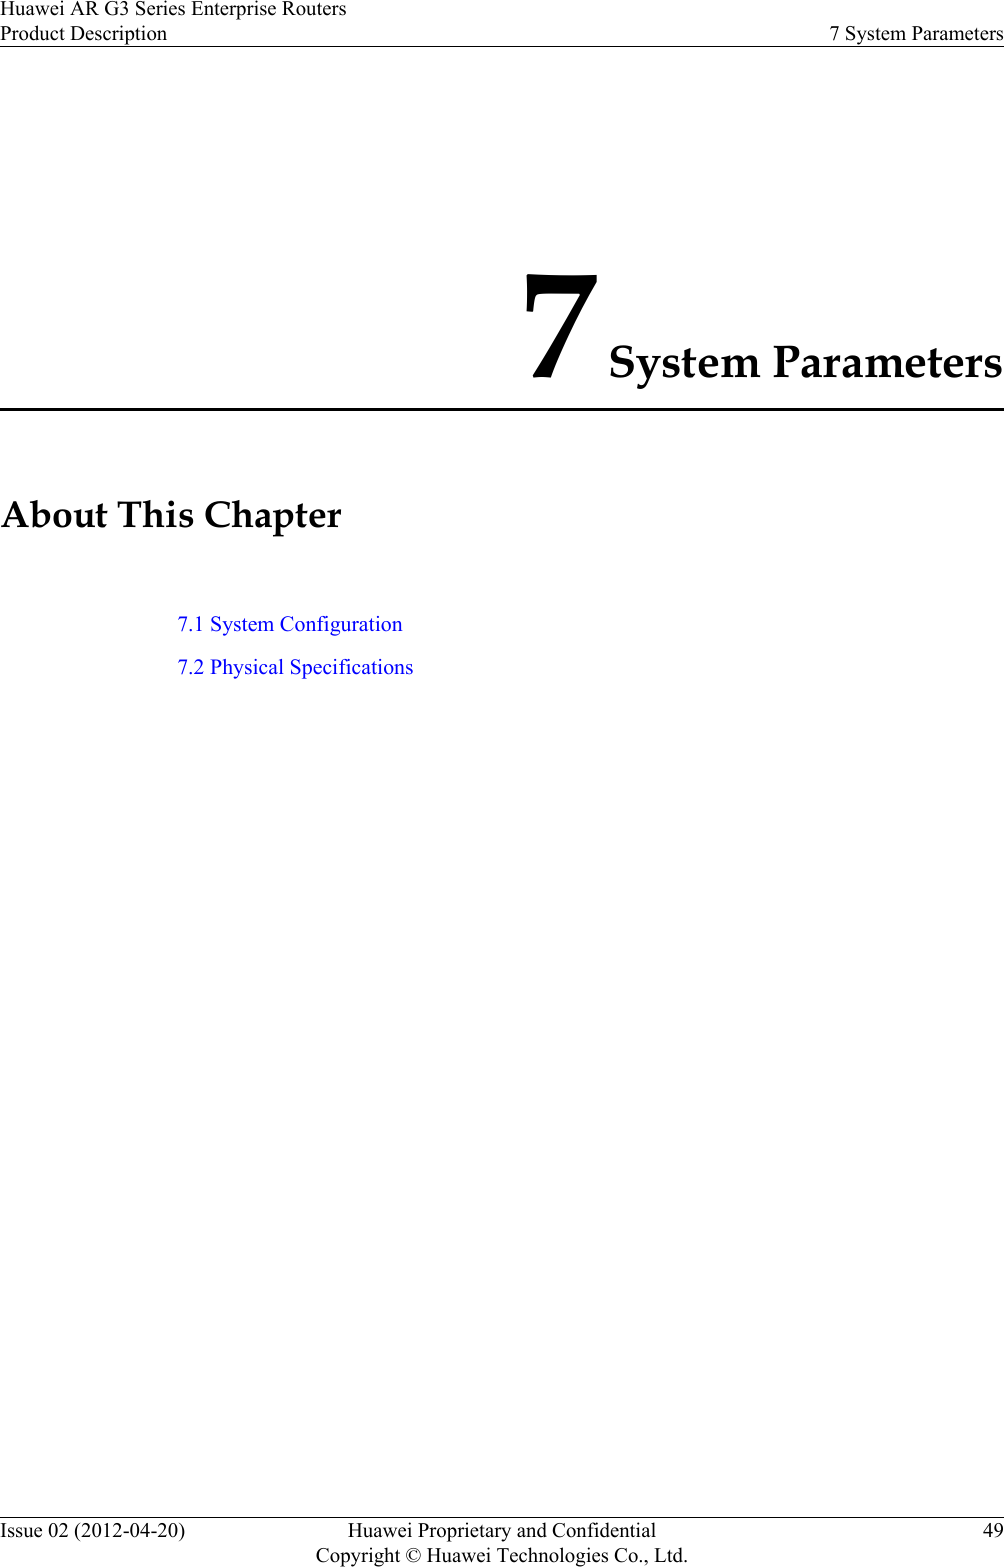 7 System ParametersAbout This Chapter7.1 System Configuration7.2 Physical SpecificationsHuawei AR G3 Series Enterprise RoutersProduct Description 7 System ParametersIssue 02 (2012-04-20) Huawei Proprietary and ConfidentialCopyright © Huawei Technologies Co., Ltd.49